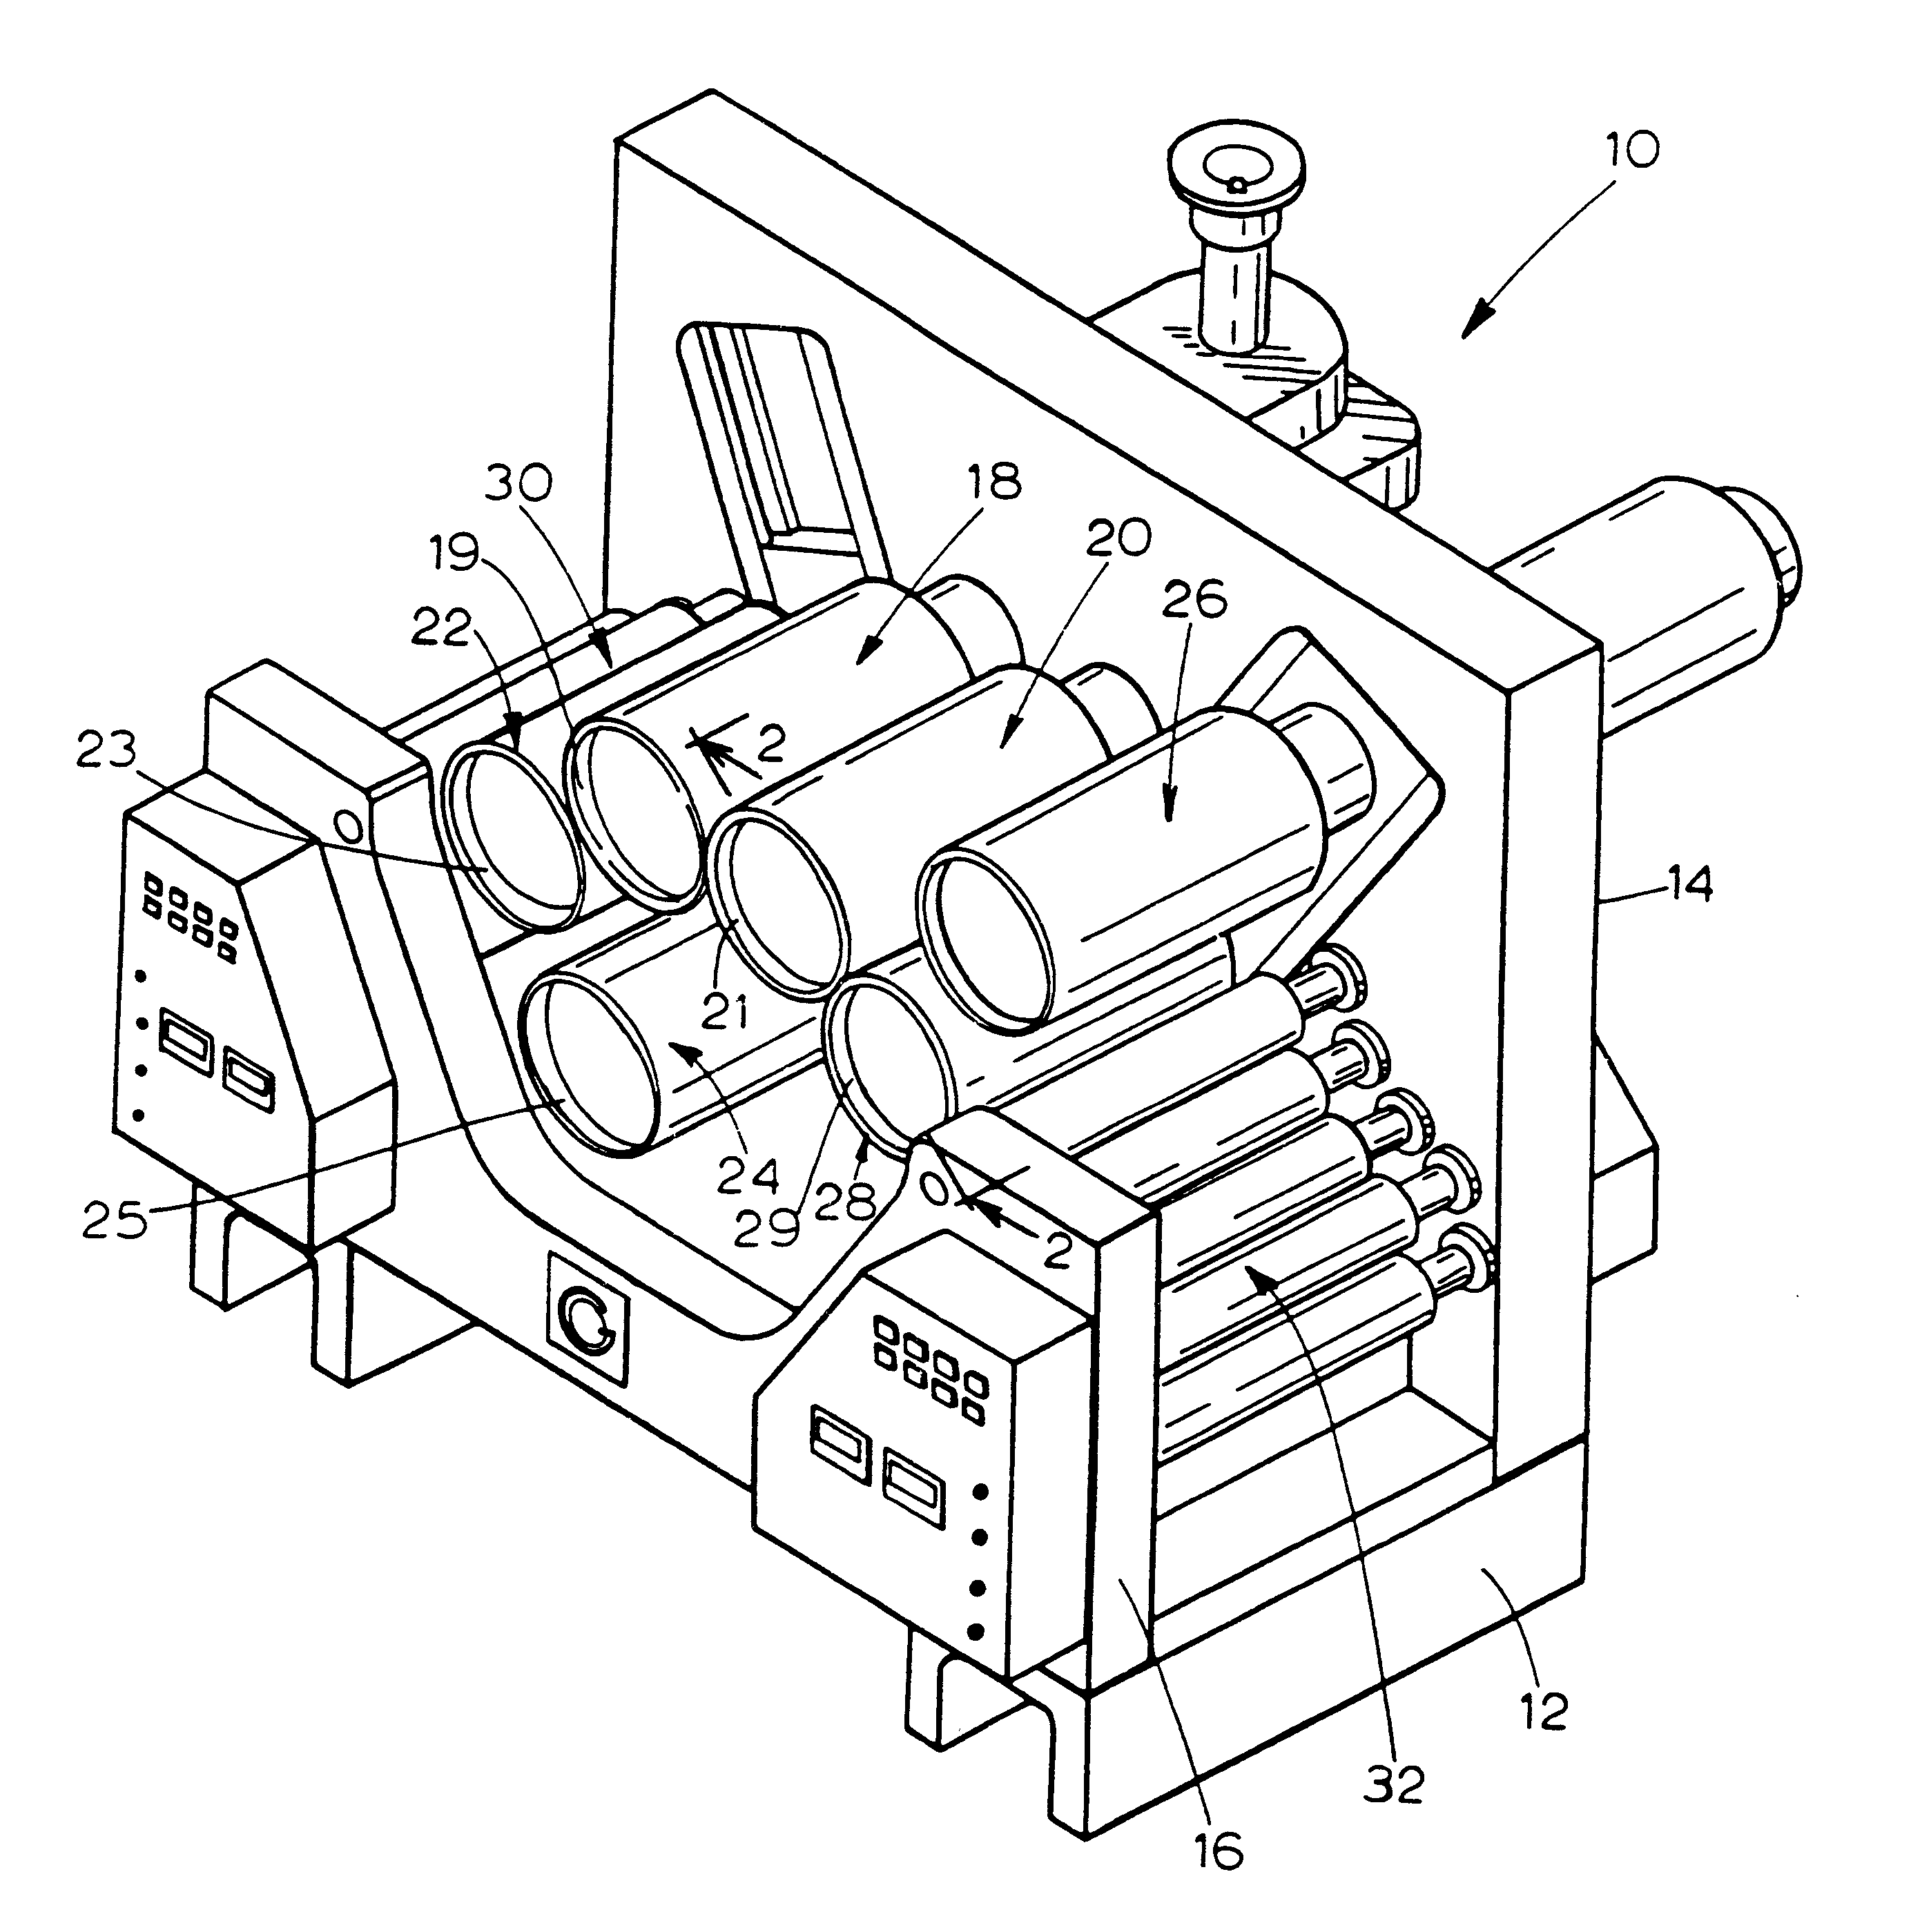 Bearing support system for a printing press having cantilevered cylinders